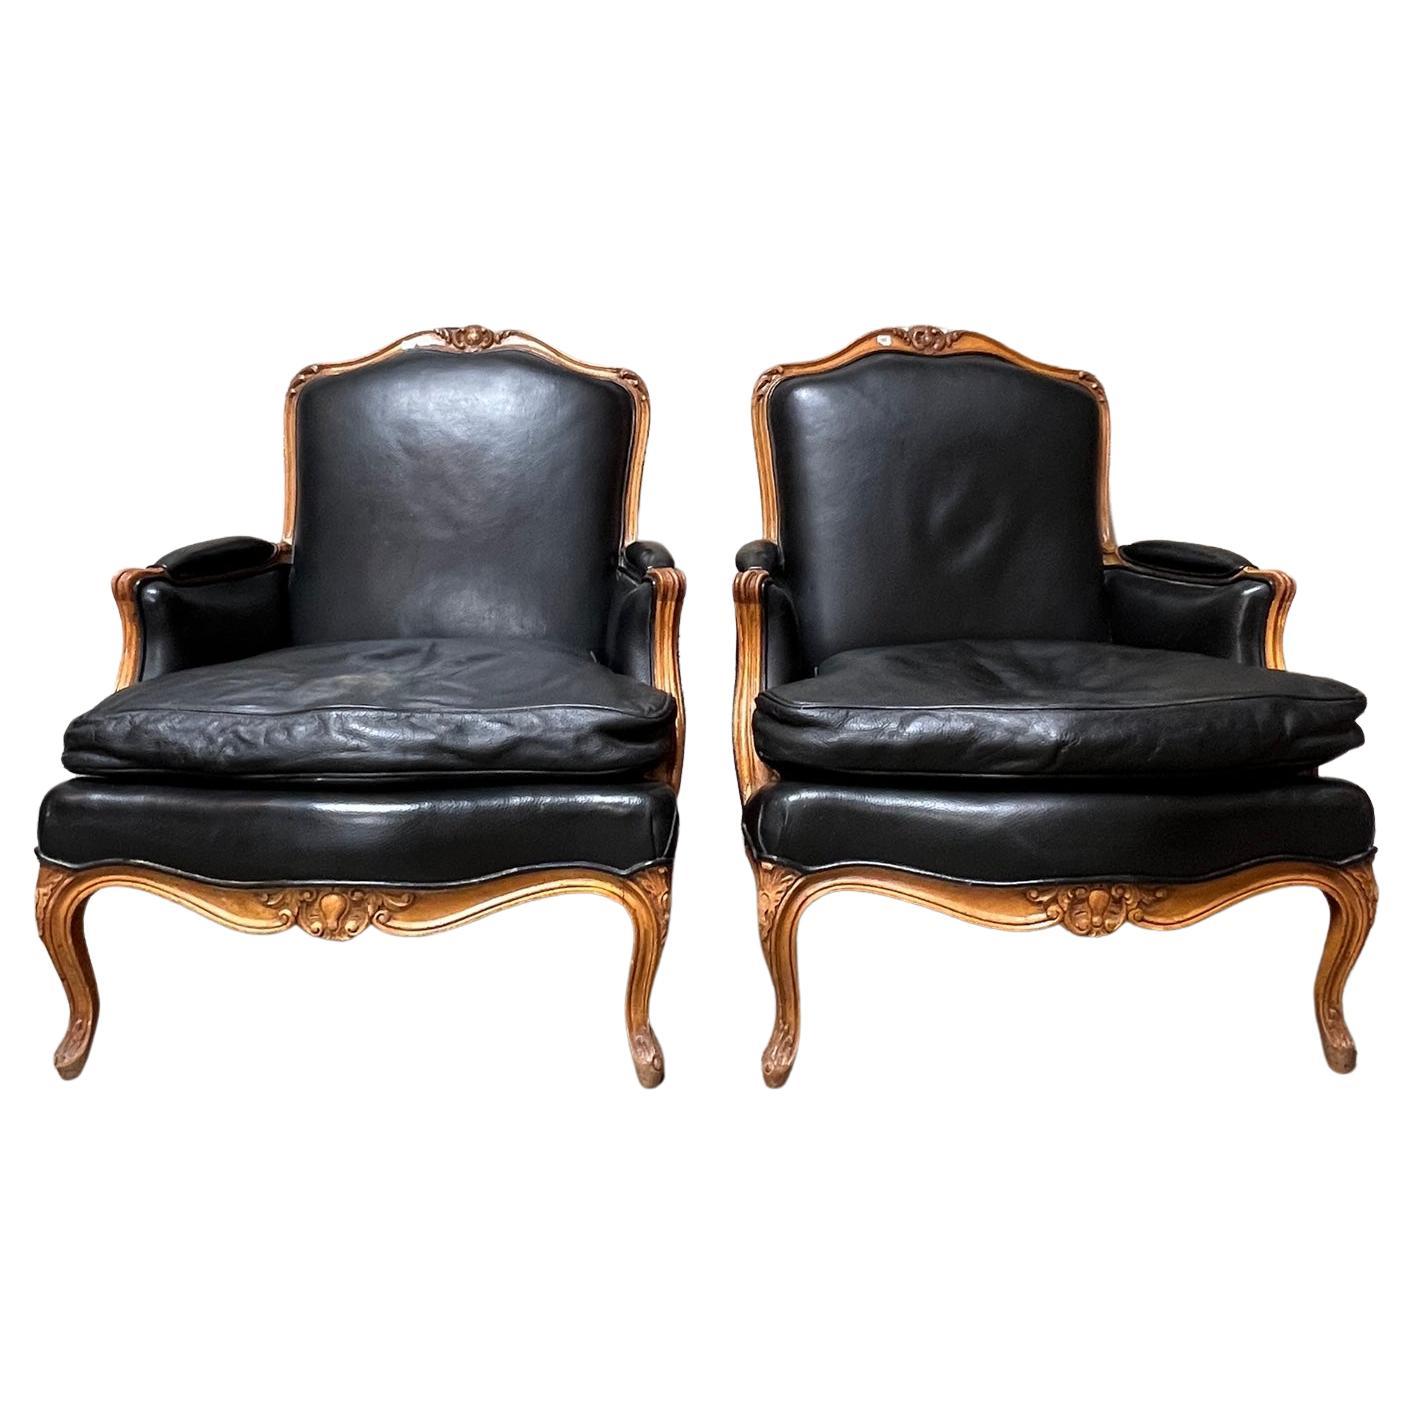 Pair of French Louis XV Style Bergeres